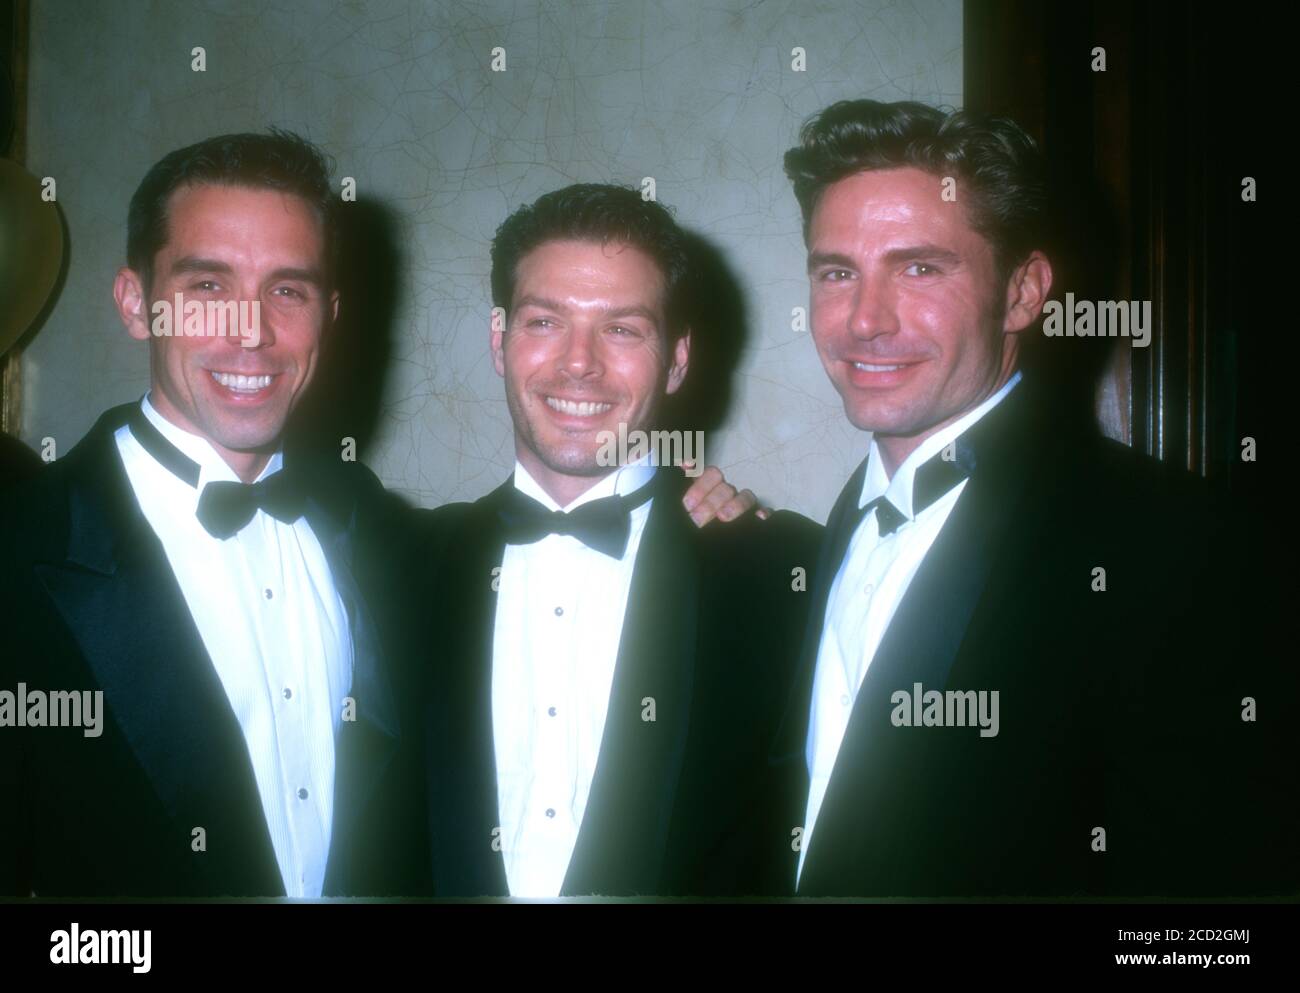 Century City, California, USA 10th March 1996 (L-R) Guest, actor Kevin Blair, aka Kevin Spirtas and Model/actor Dirk Shafer attend the Seventh Annual GLAAD Media Awards on March 10, 1996 at the Century Plaza Hotel in Century City, California, USA. Photo by Barry King/Alamy Stock Photo Stock Photo